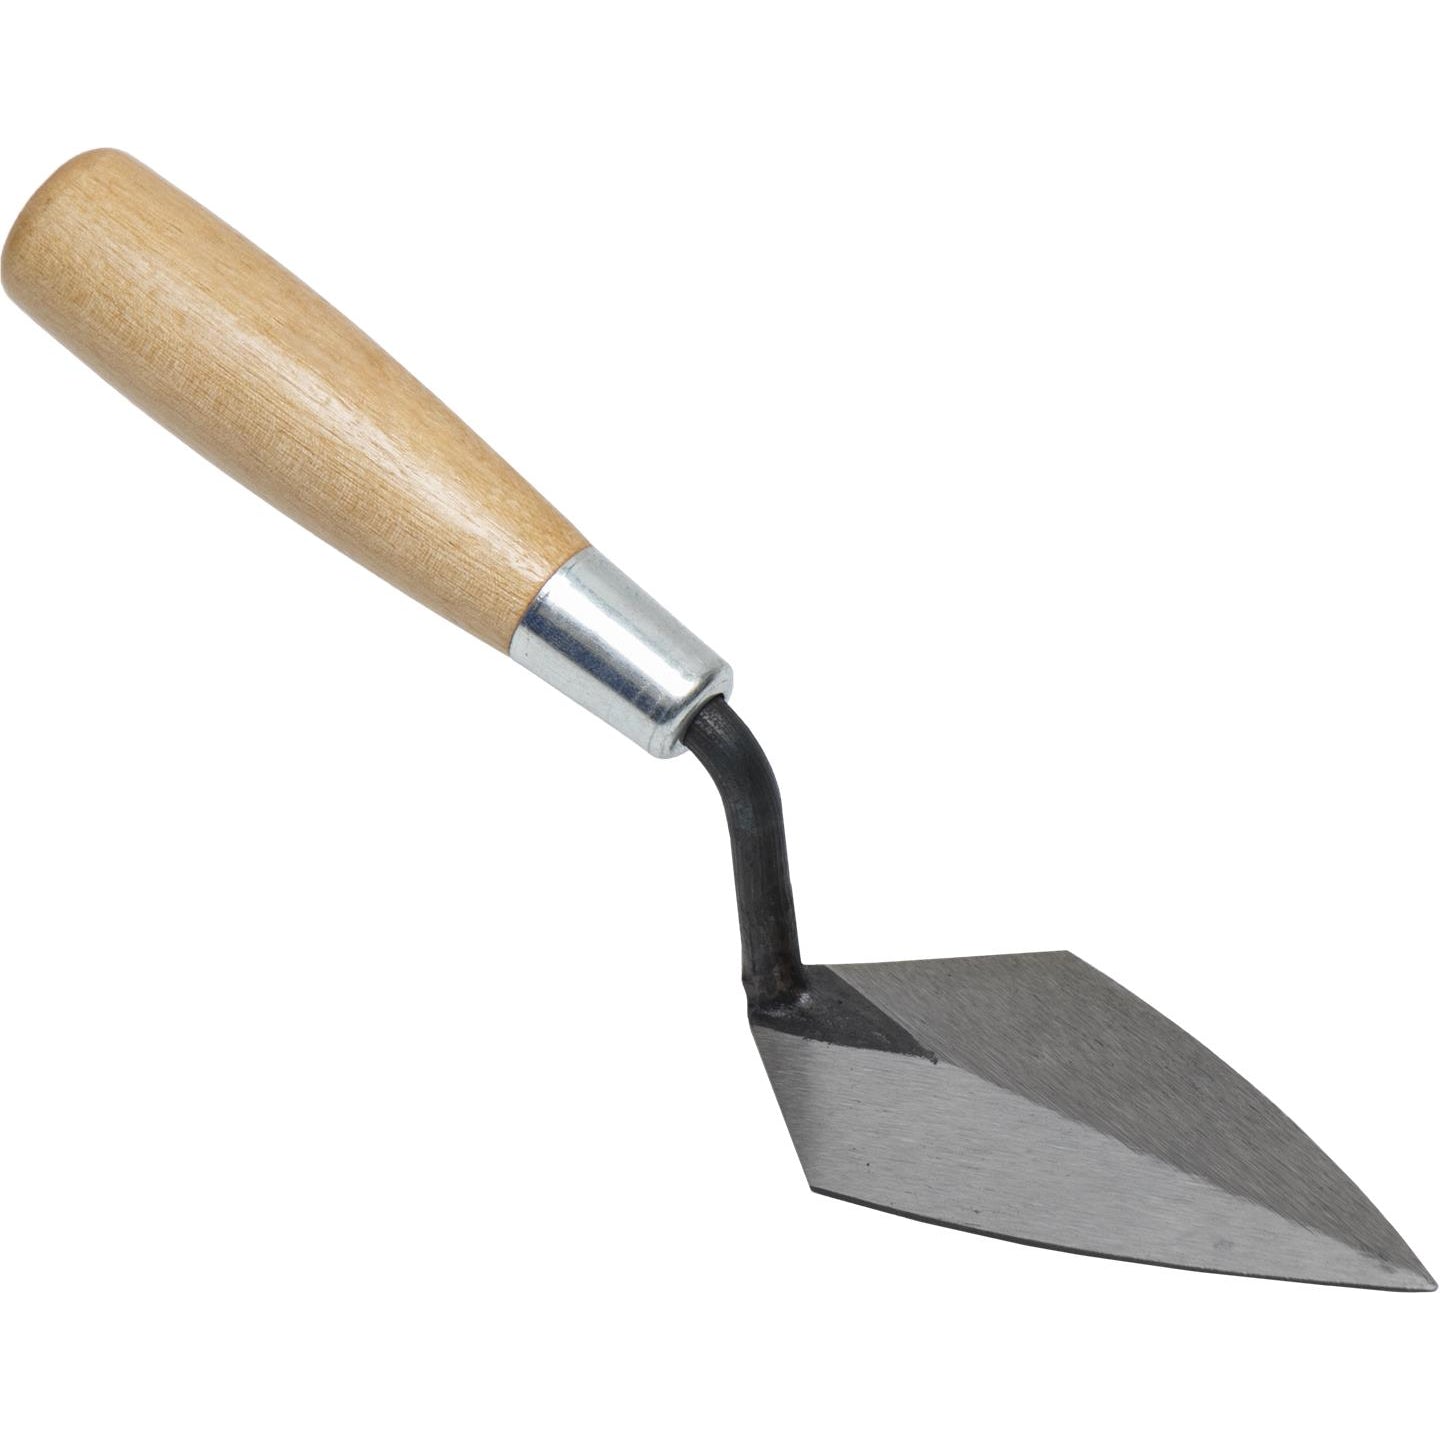 TROWEL POINTING 6X2-3/4IN WOOD